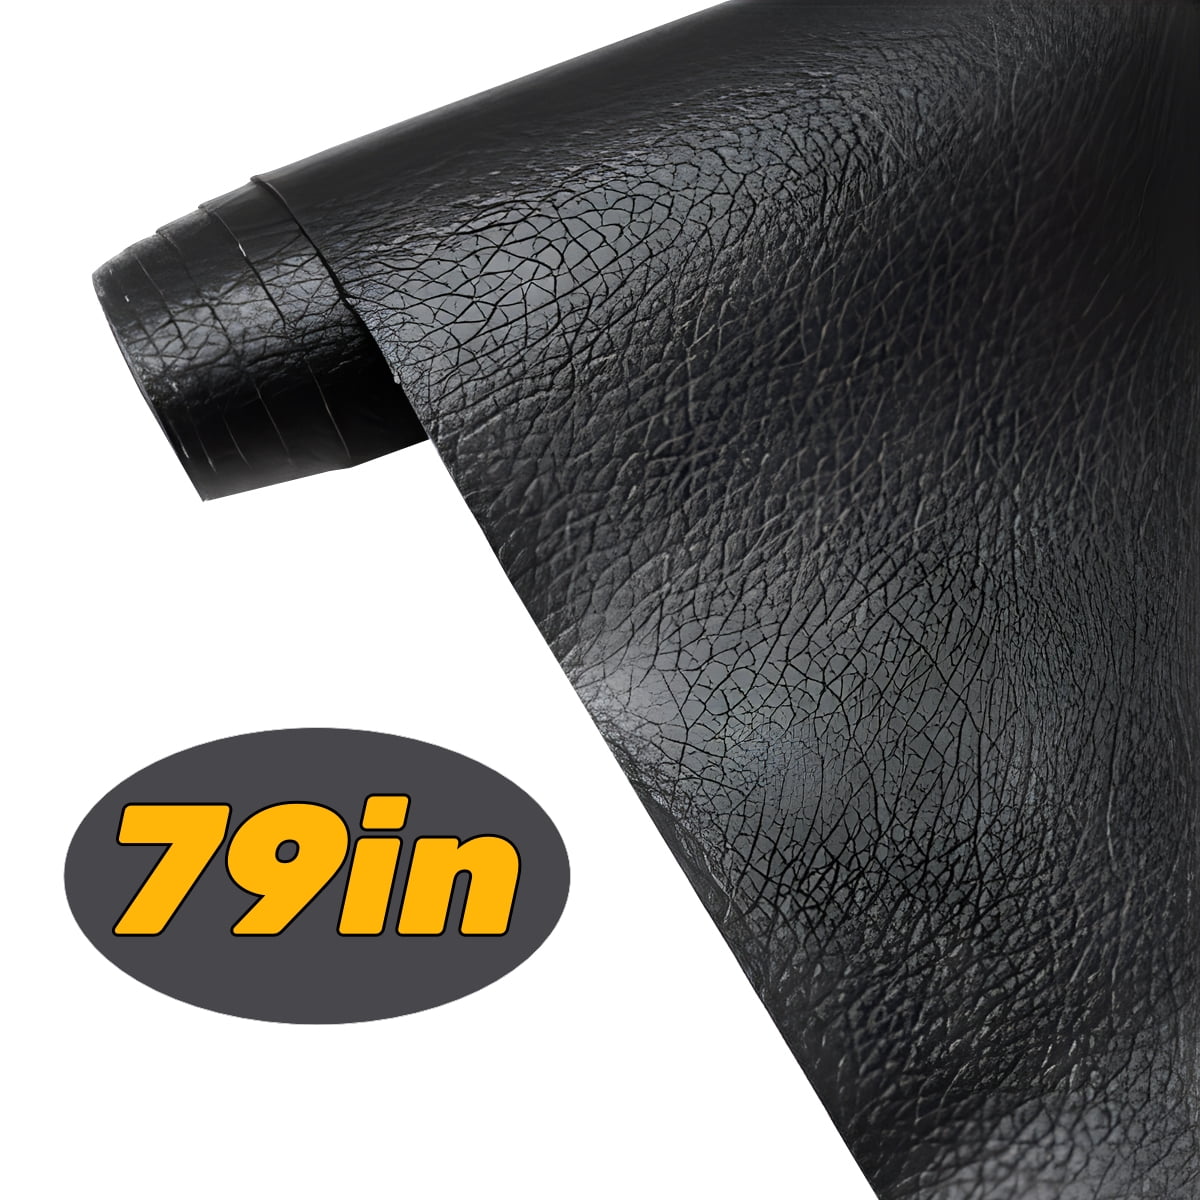  MastaPlasta Self-Adhesive Premium Leather Repair Patch - Black  8in x 4in (20 x 10 cm). Instant Upholstery Quality Patch for Sofas, Car  Interiors, Bags, Jackets, Vinyl & More